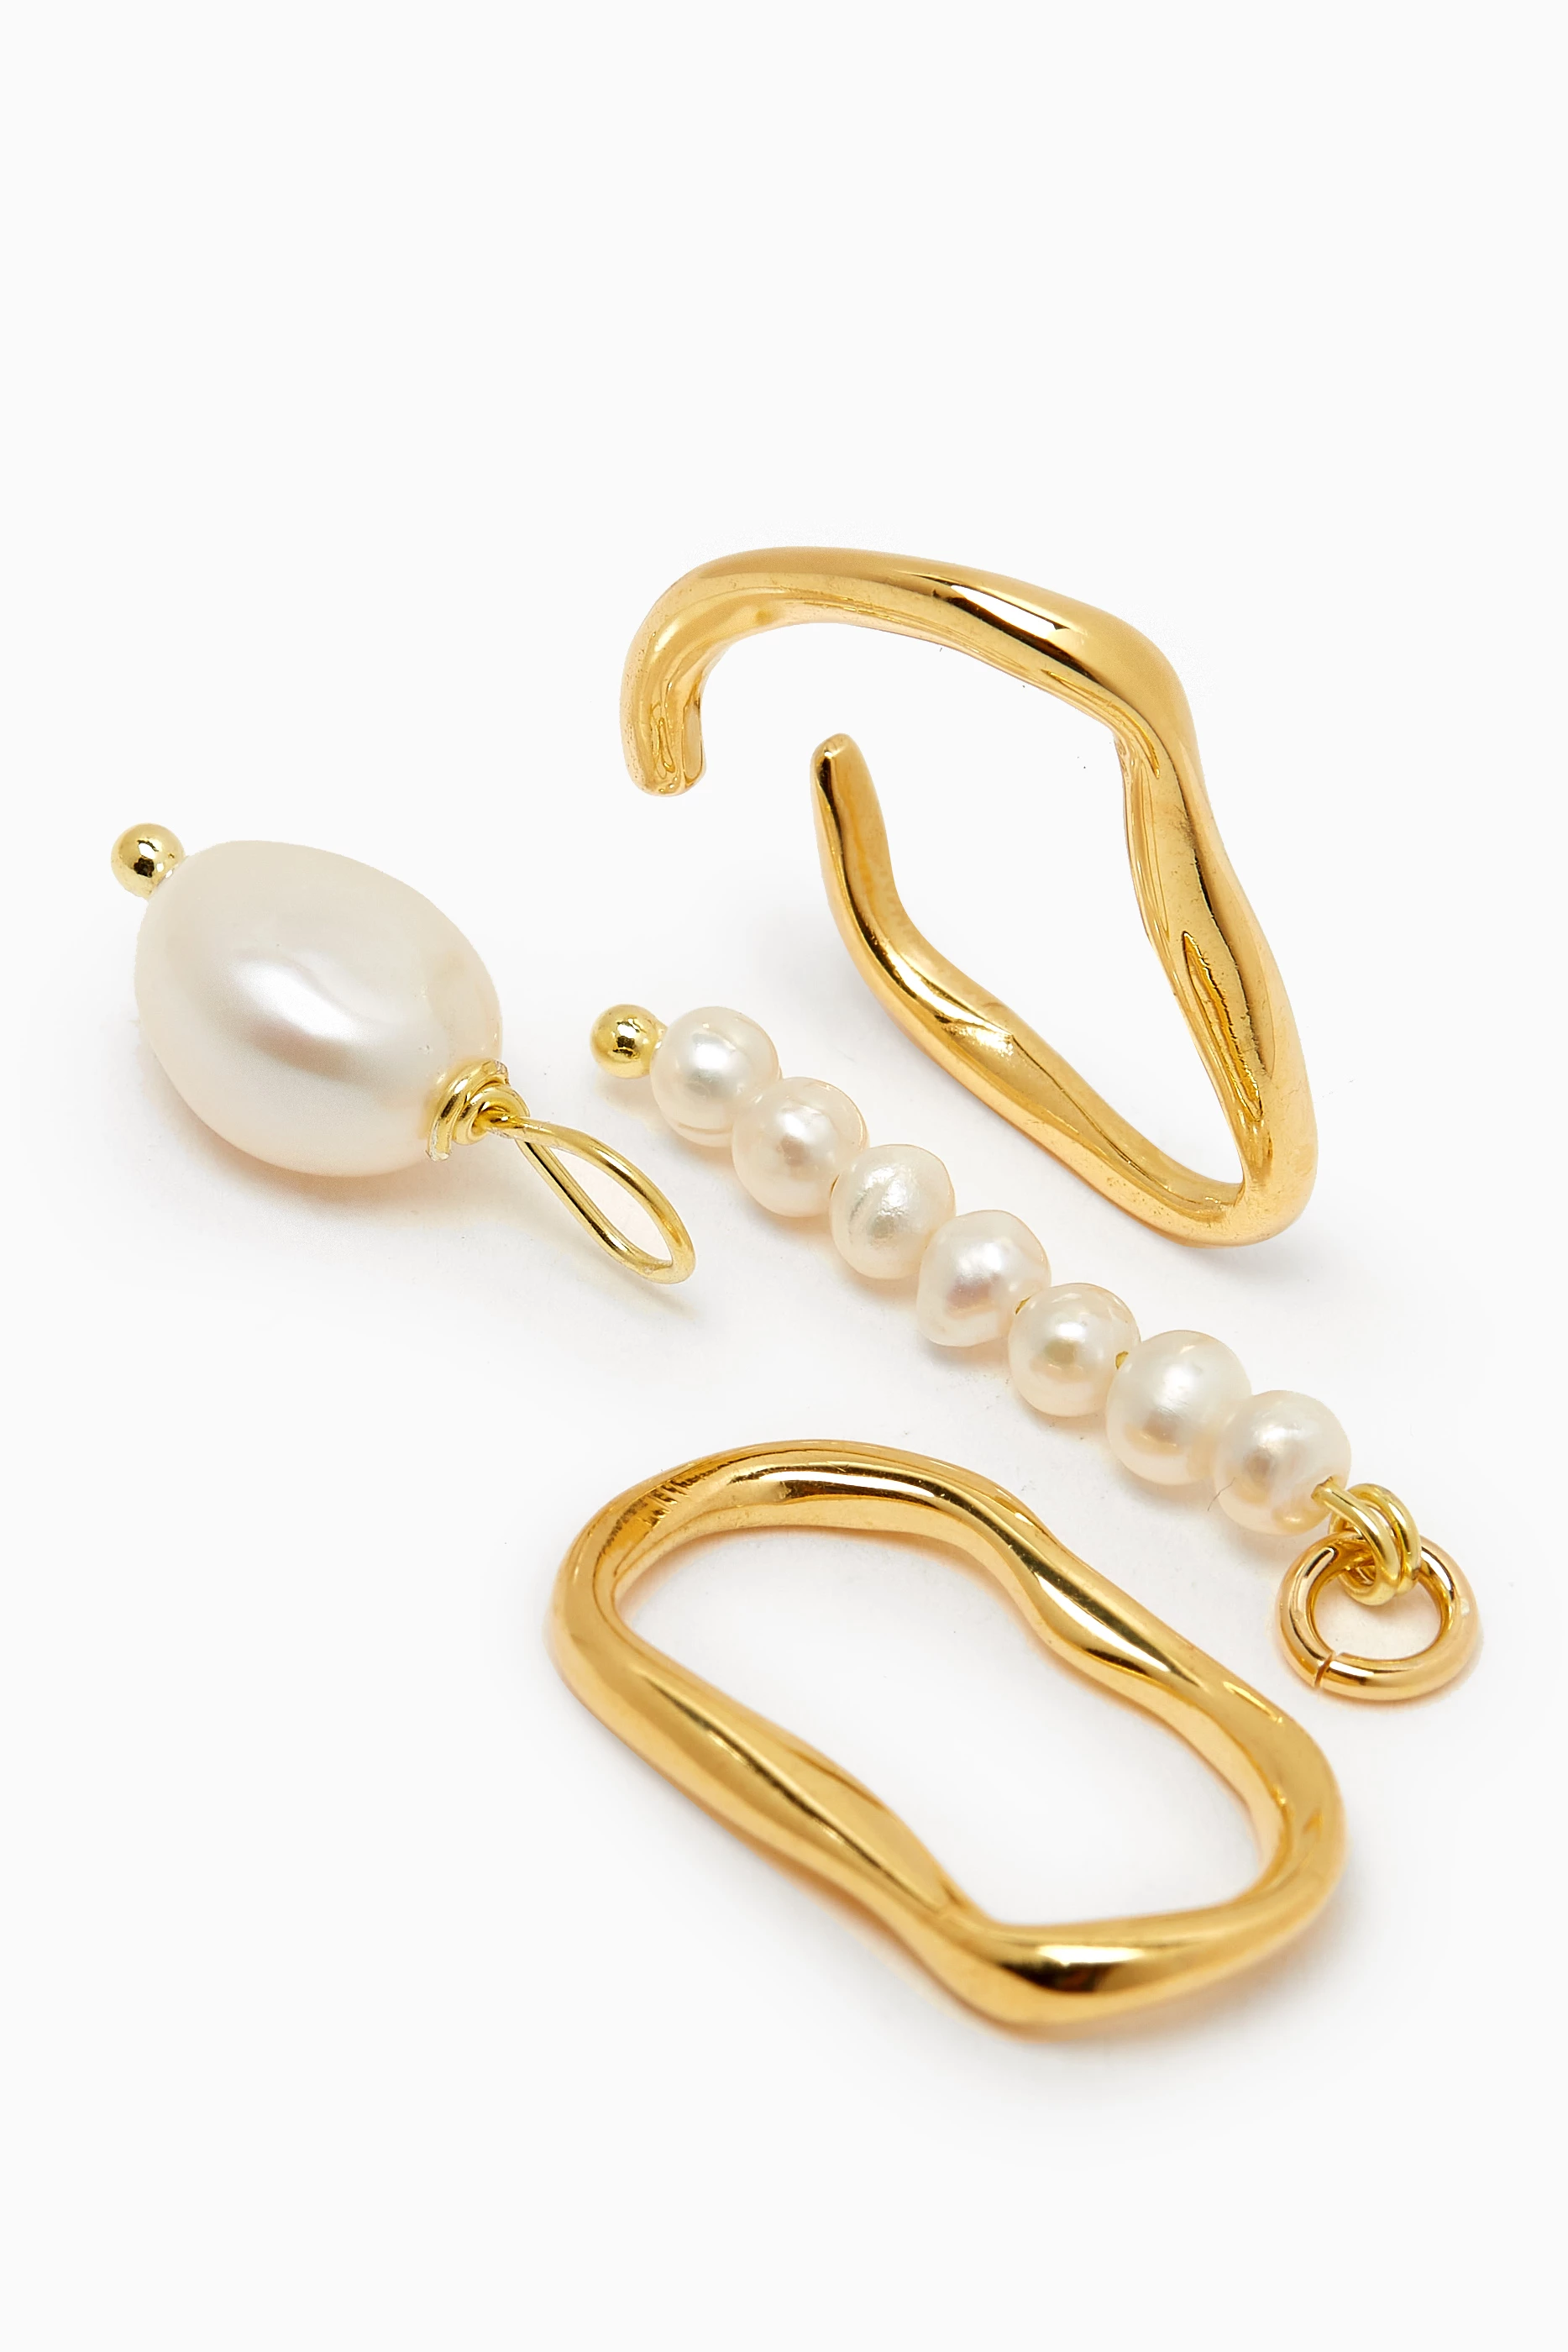 Buy Bonvo White Hola Pearl Single Left Ear Cuff in 18kt Gold